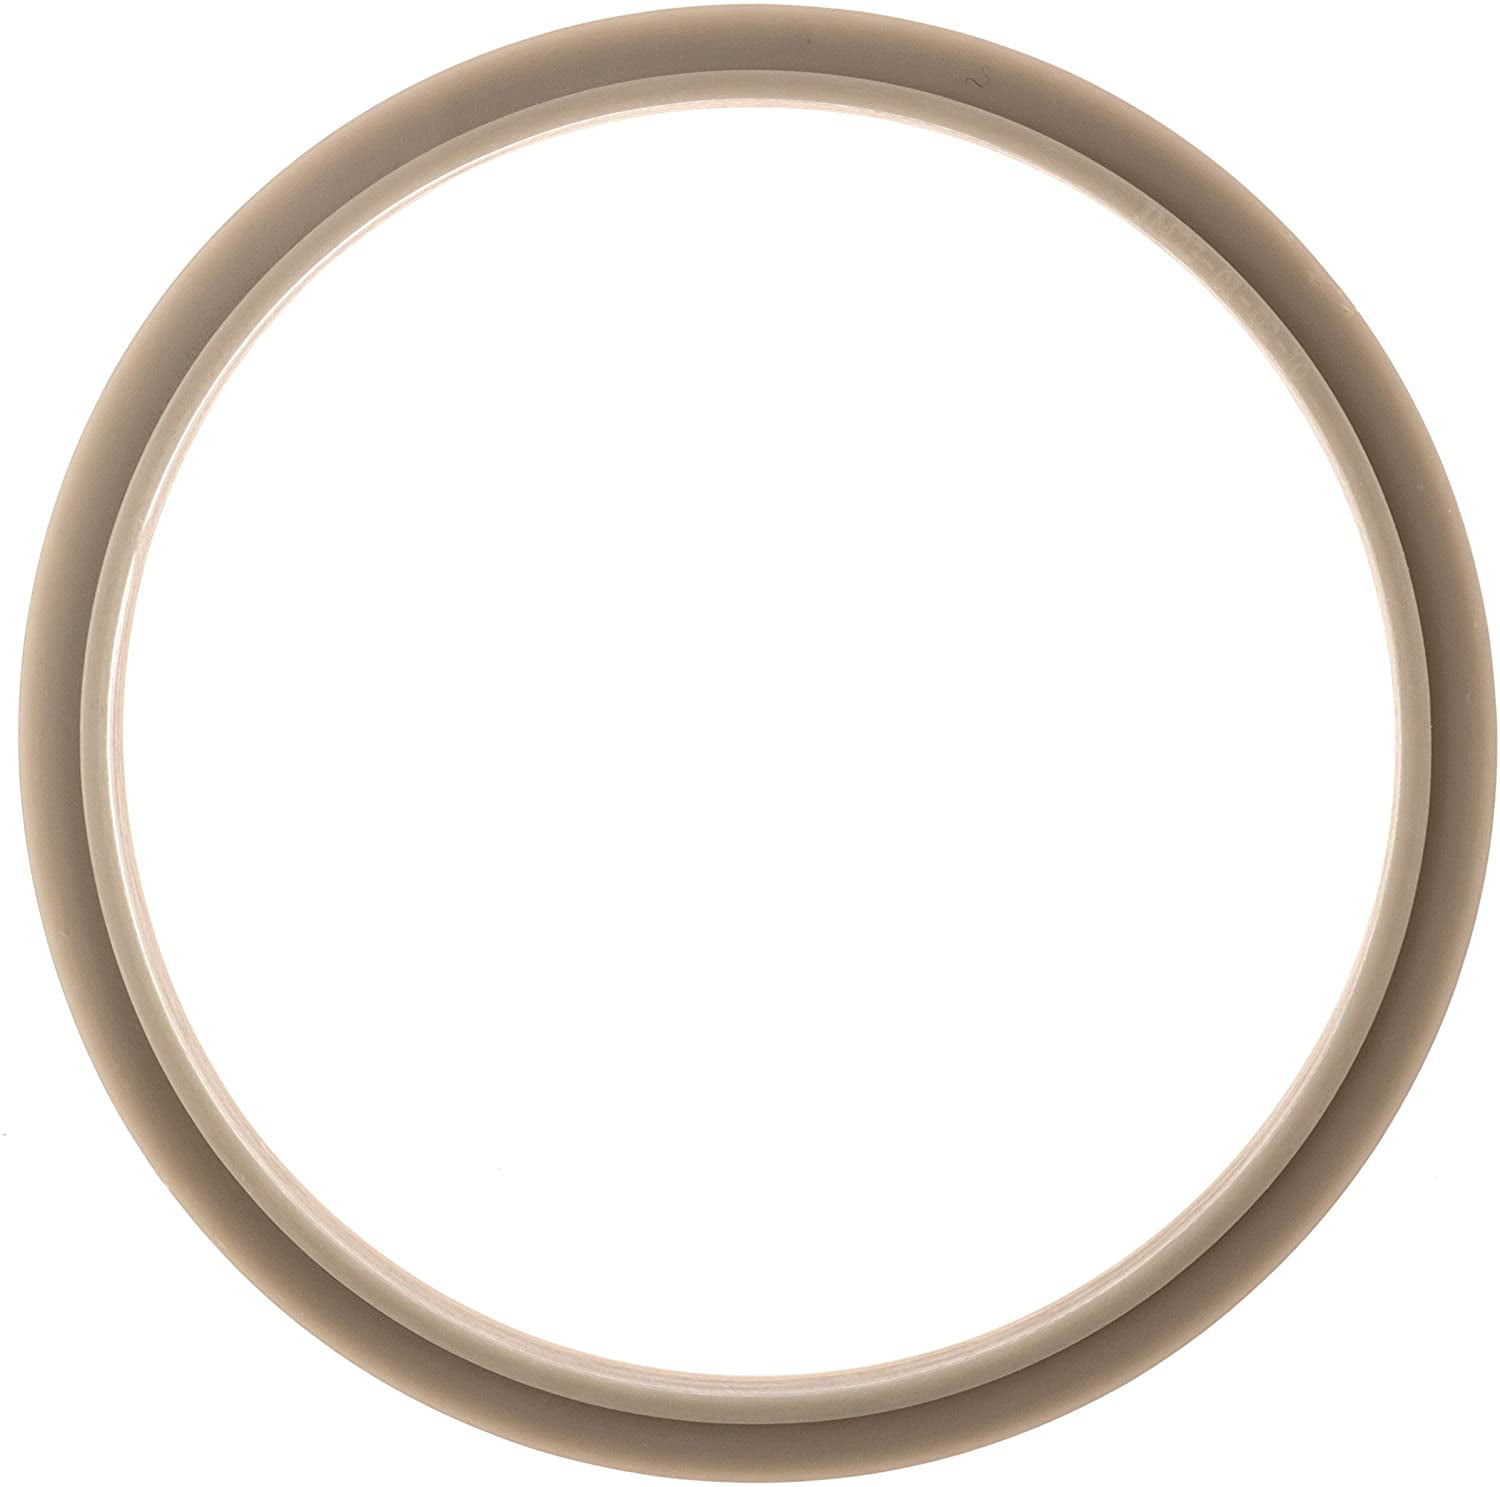 Pack of 5 Replacements Gaskets for Nutribullet 600 and Pro 